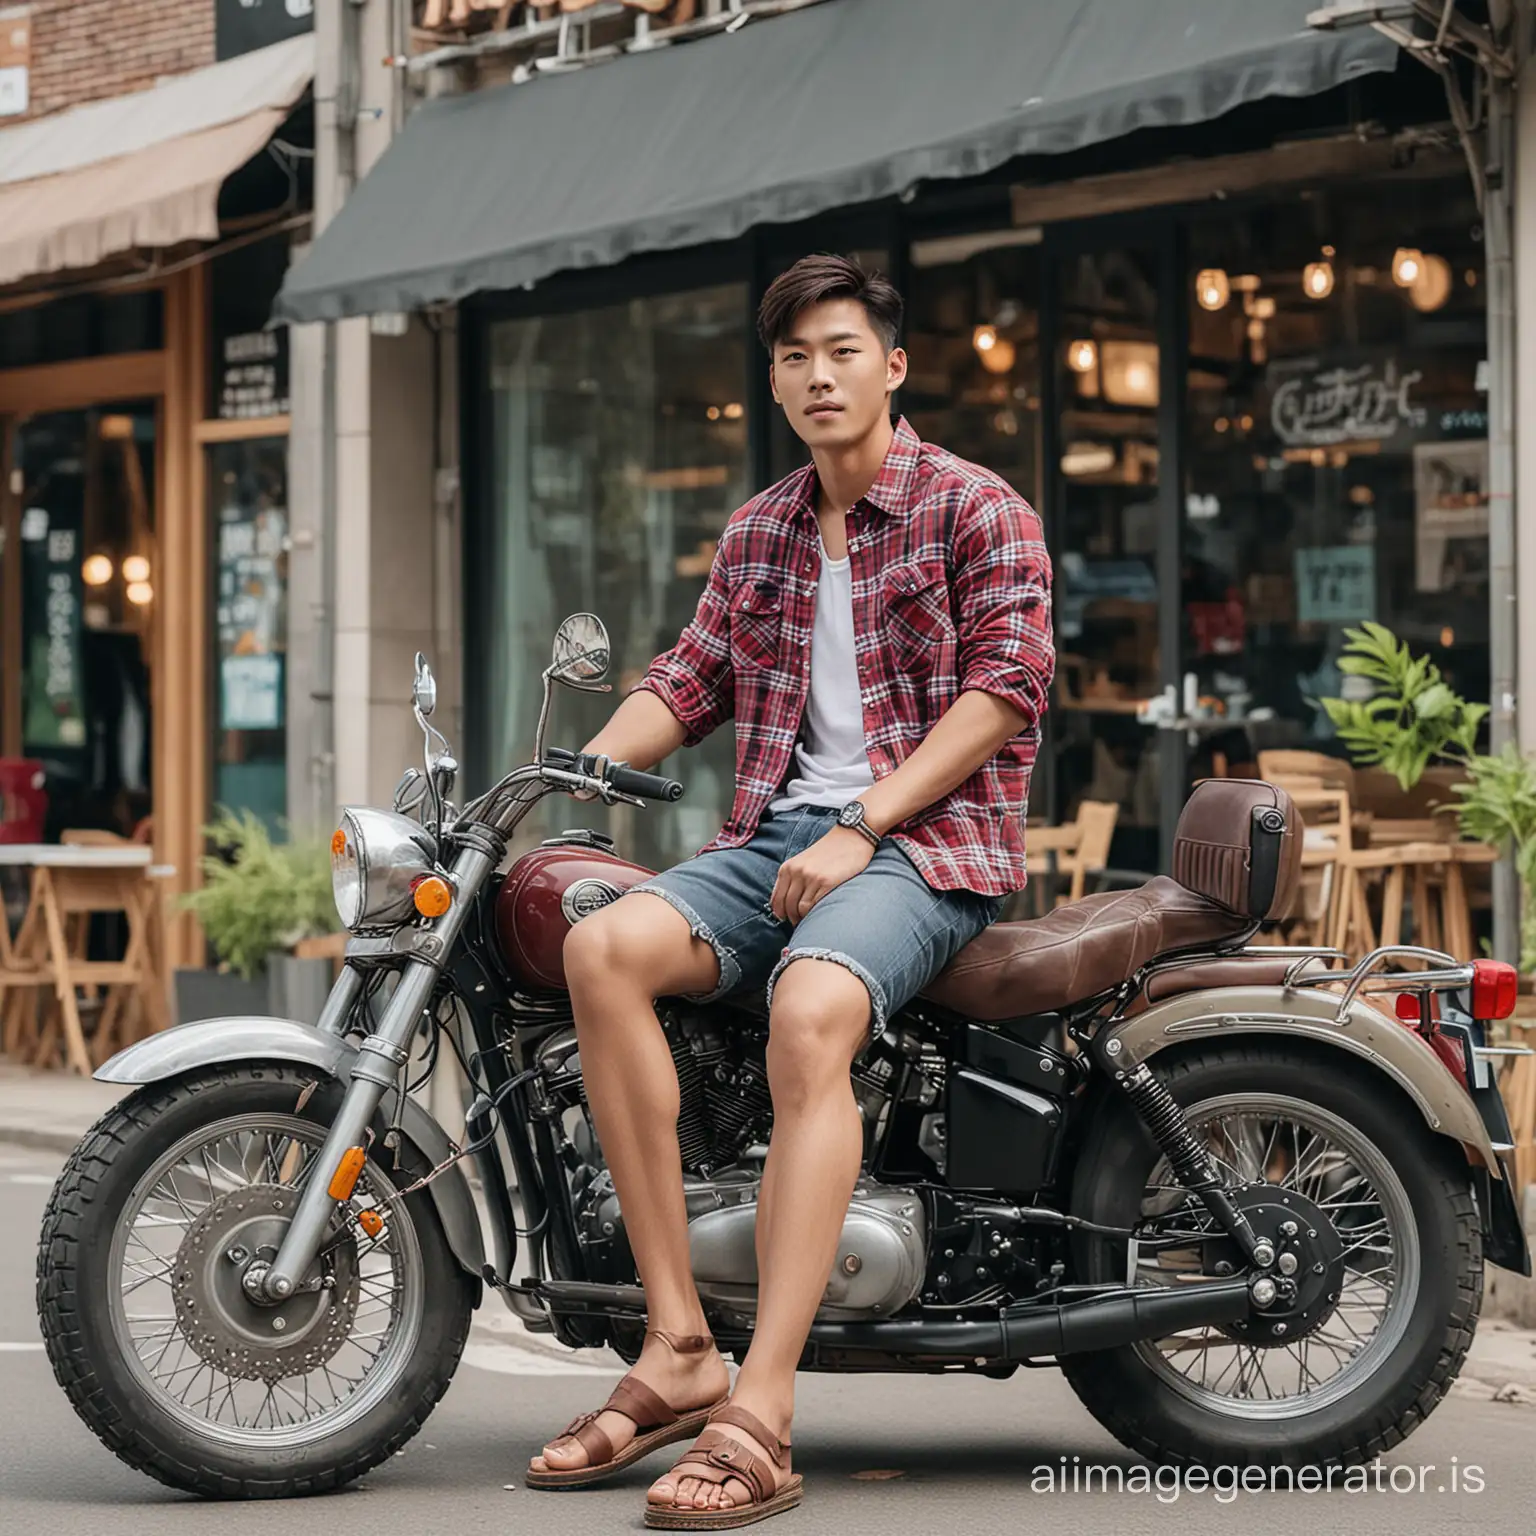 A handsome Asian Korean man wearing a flannel shirt paired with shorts and sandals sitting on a large motorcycle, in front of a cafe background